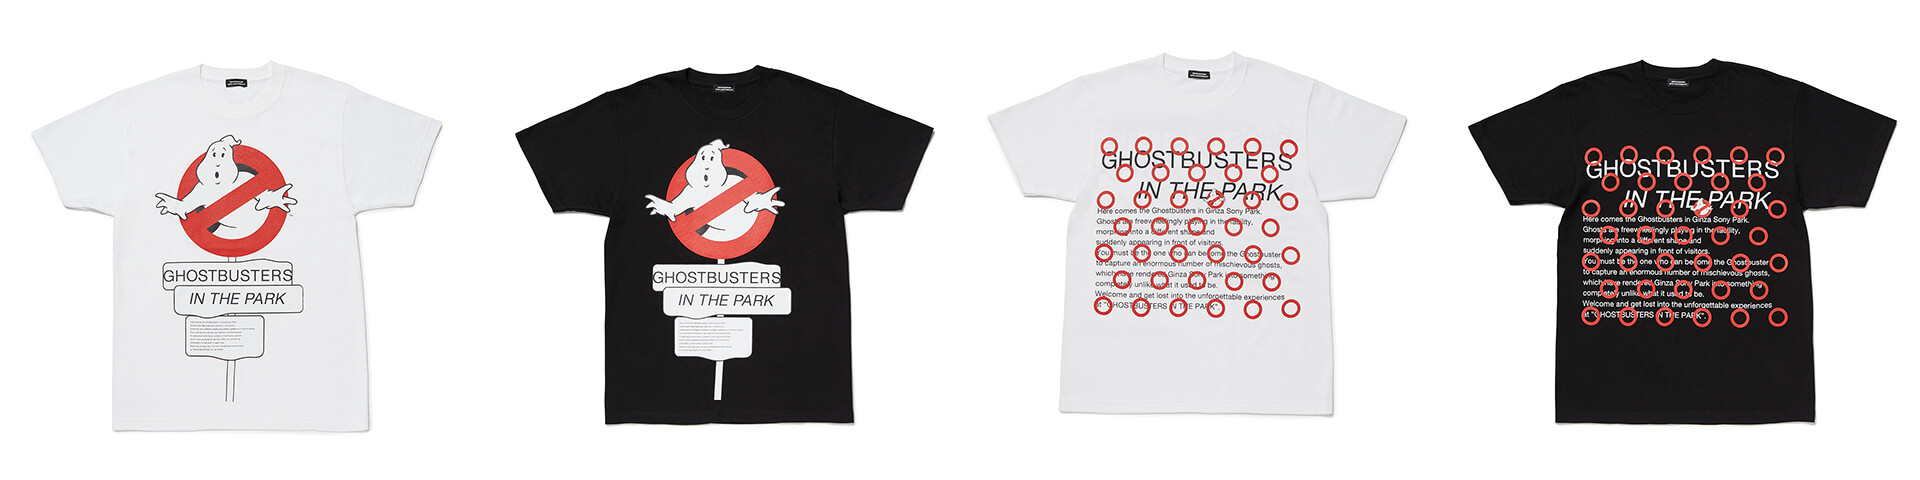 #011 GHOSTBUSTERS IN THE PARK　Tシャツ